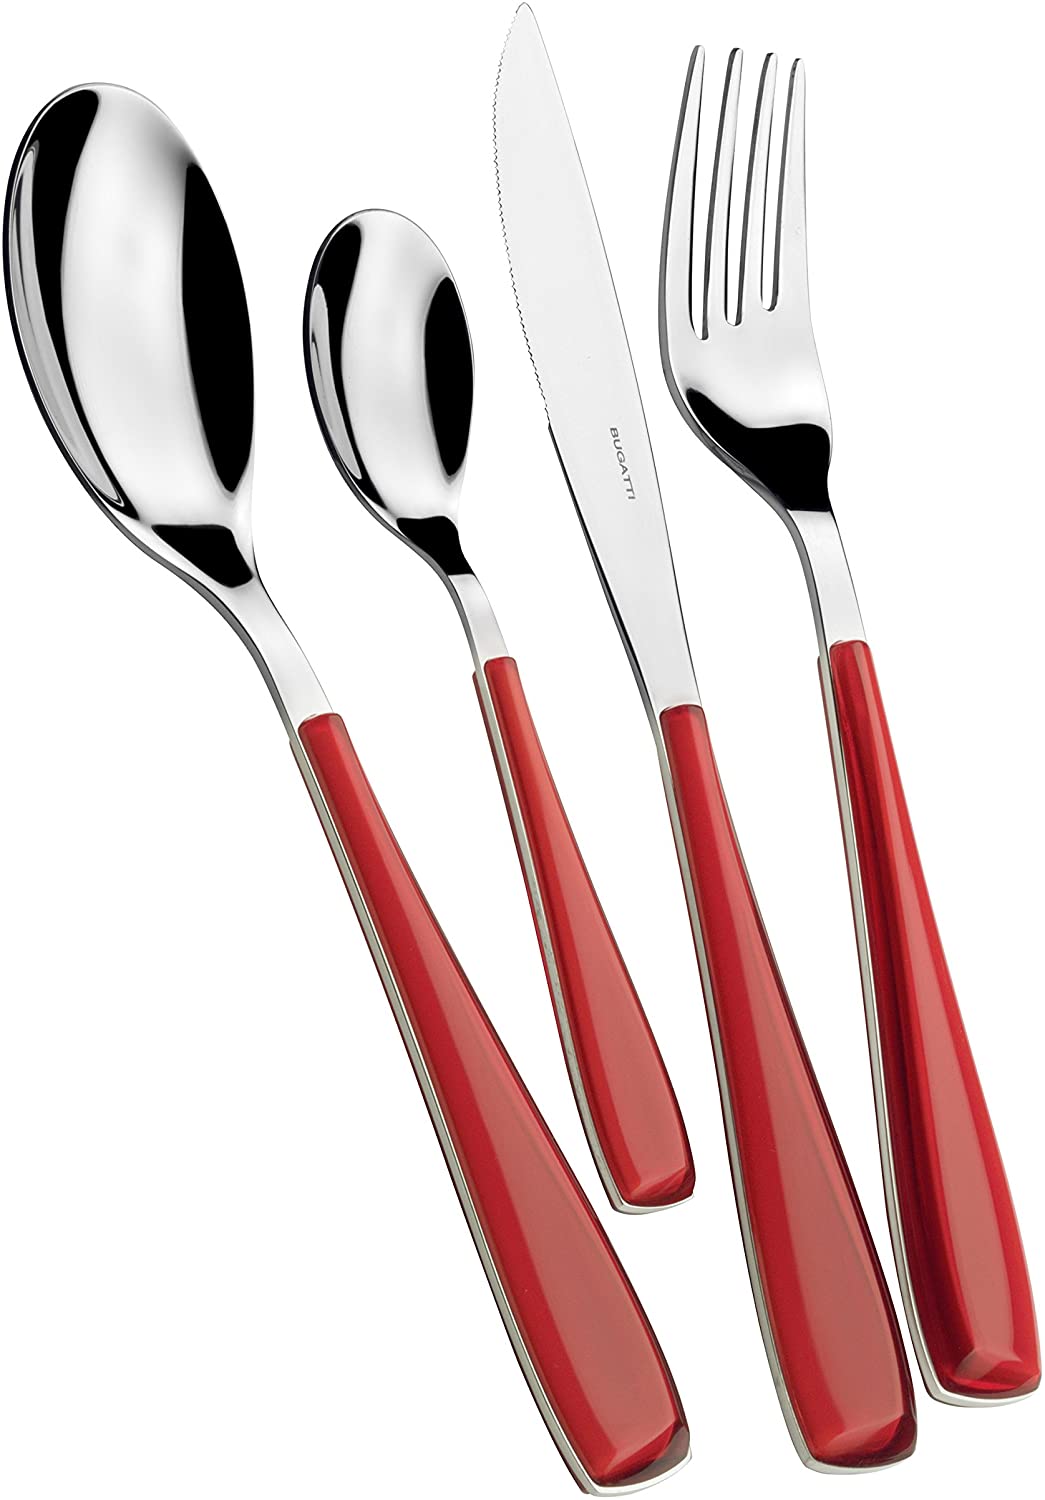 BUGATTI, Essenza, 24 Piece Cutlery Set in 18/10 Stainless Steel and Red Handle. Cutlery Set for 6 People Consisting of 6 Spoons, 6 Forks, 6 Knives and 6 Coffee Spoons